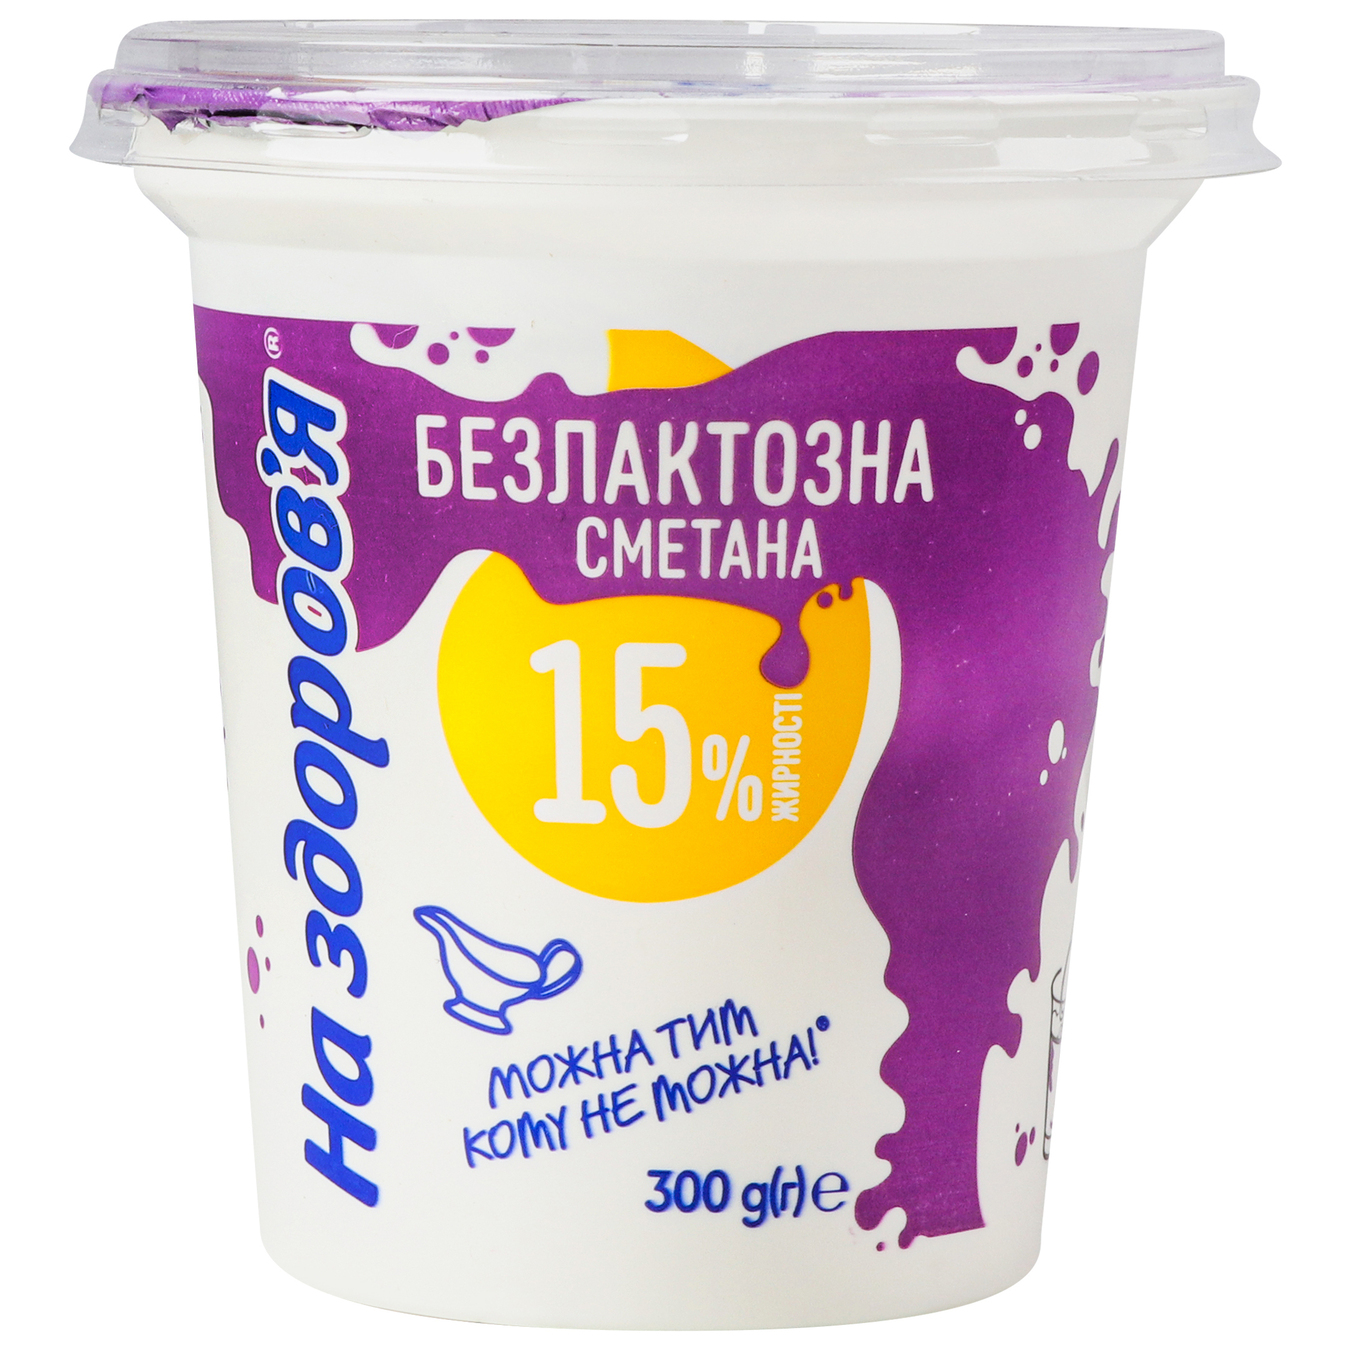 Sour cream Lactose-free for health 15% 300g